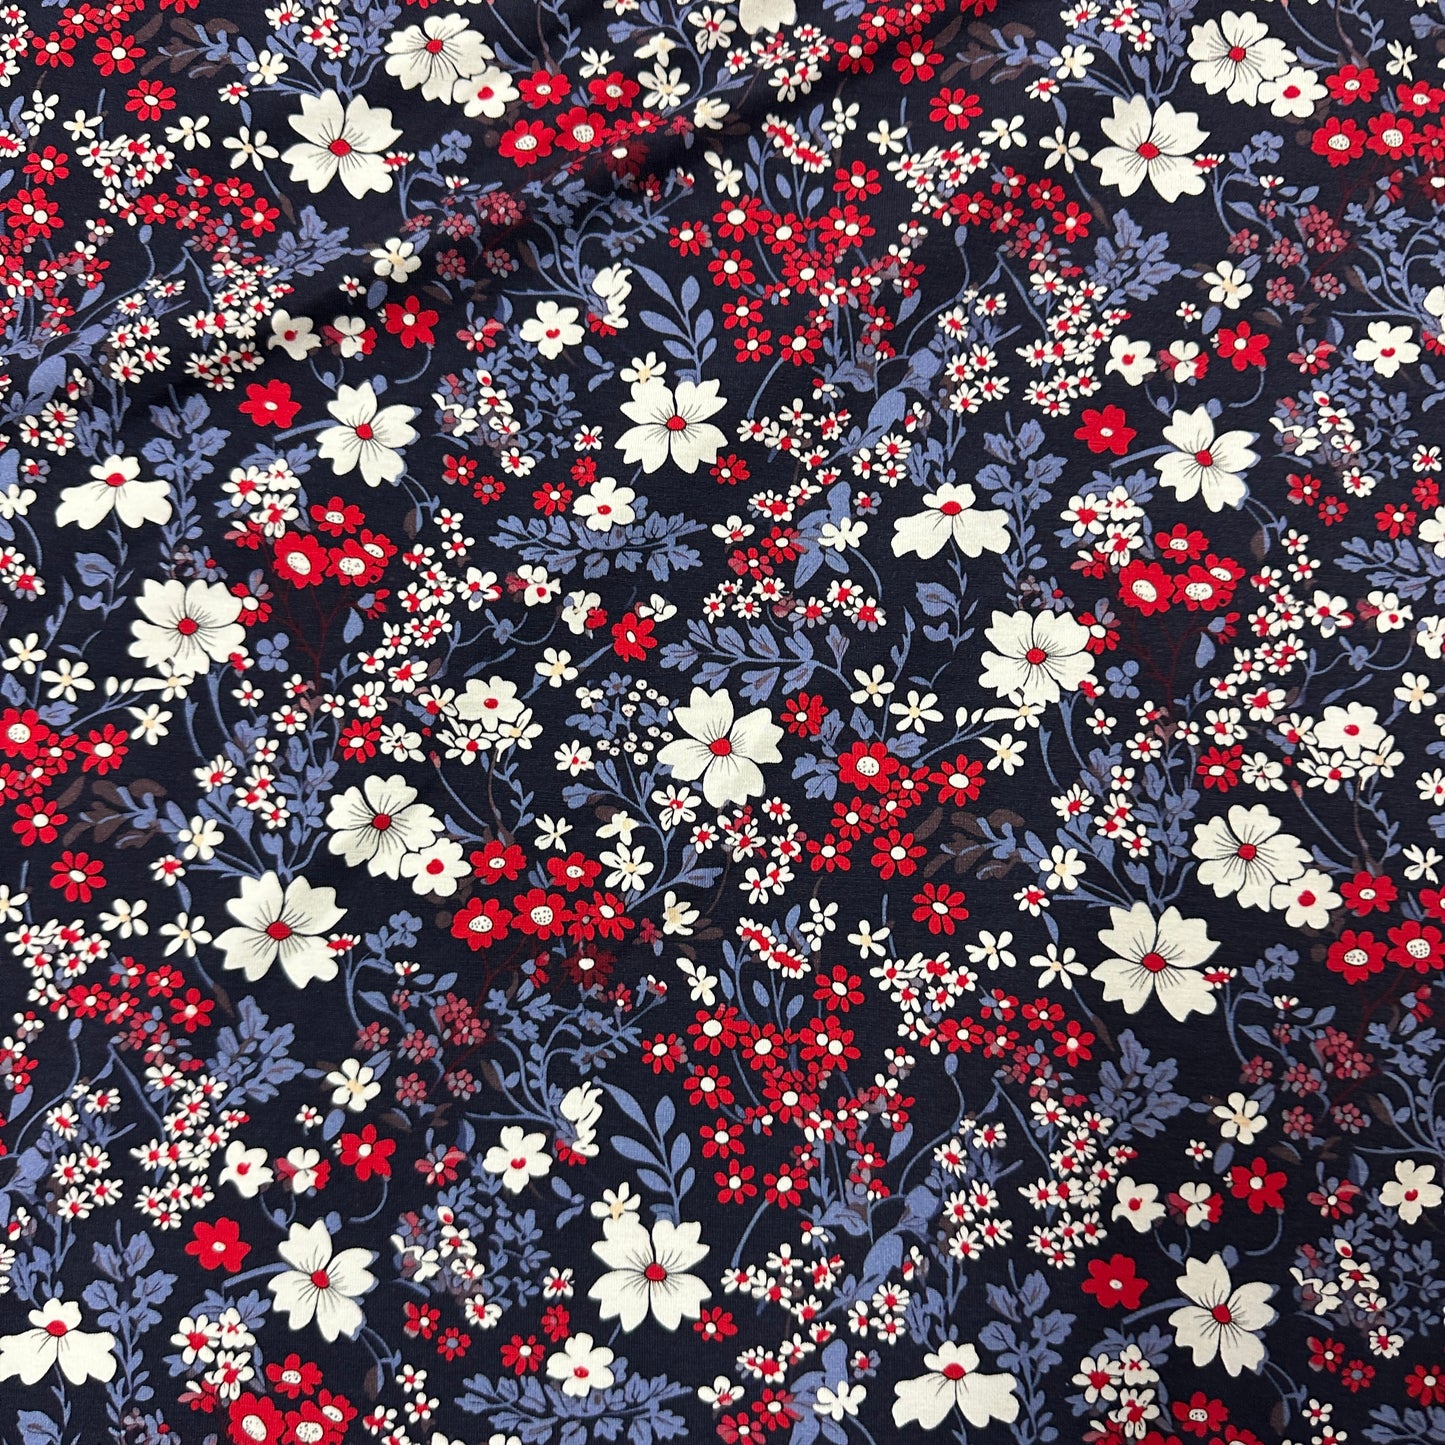 Red, White and Blue Floral on Bamboo/Spandex Jersey Fabric